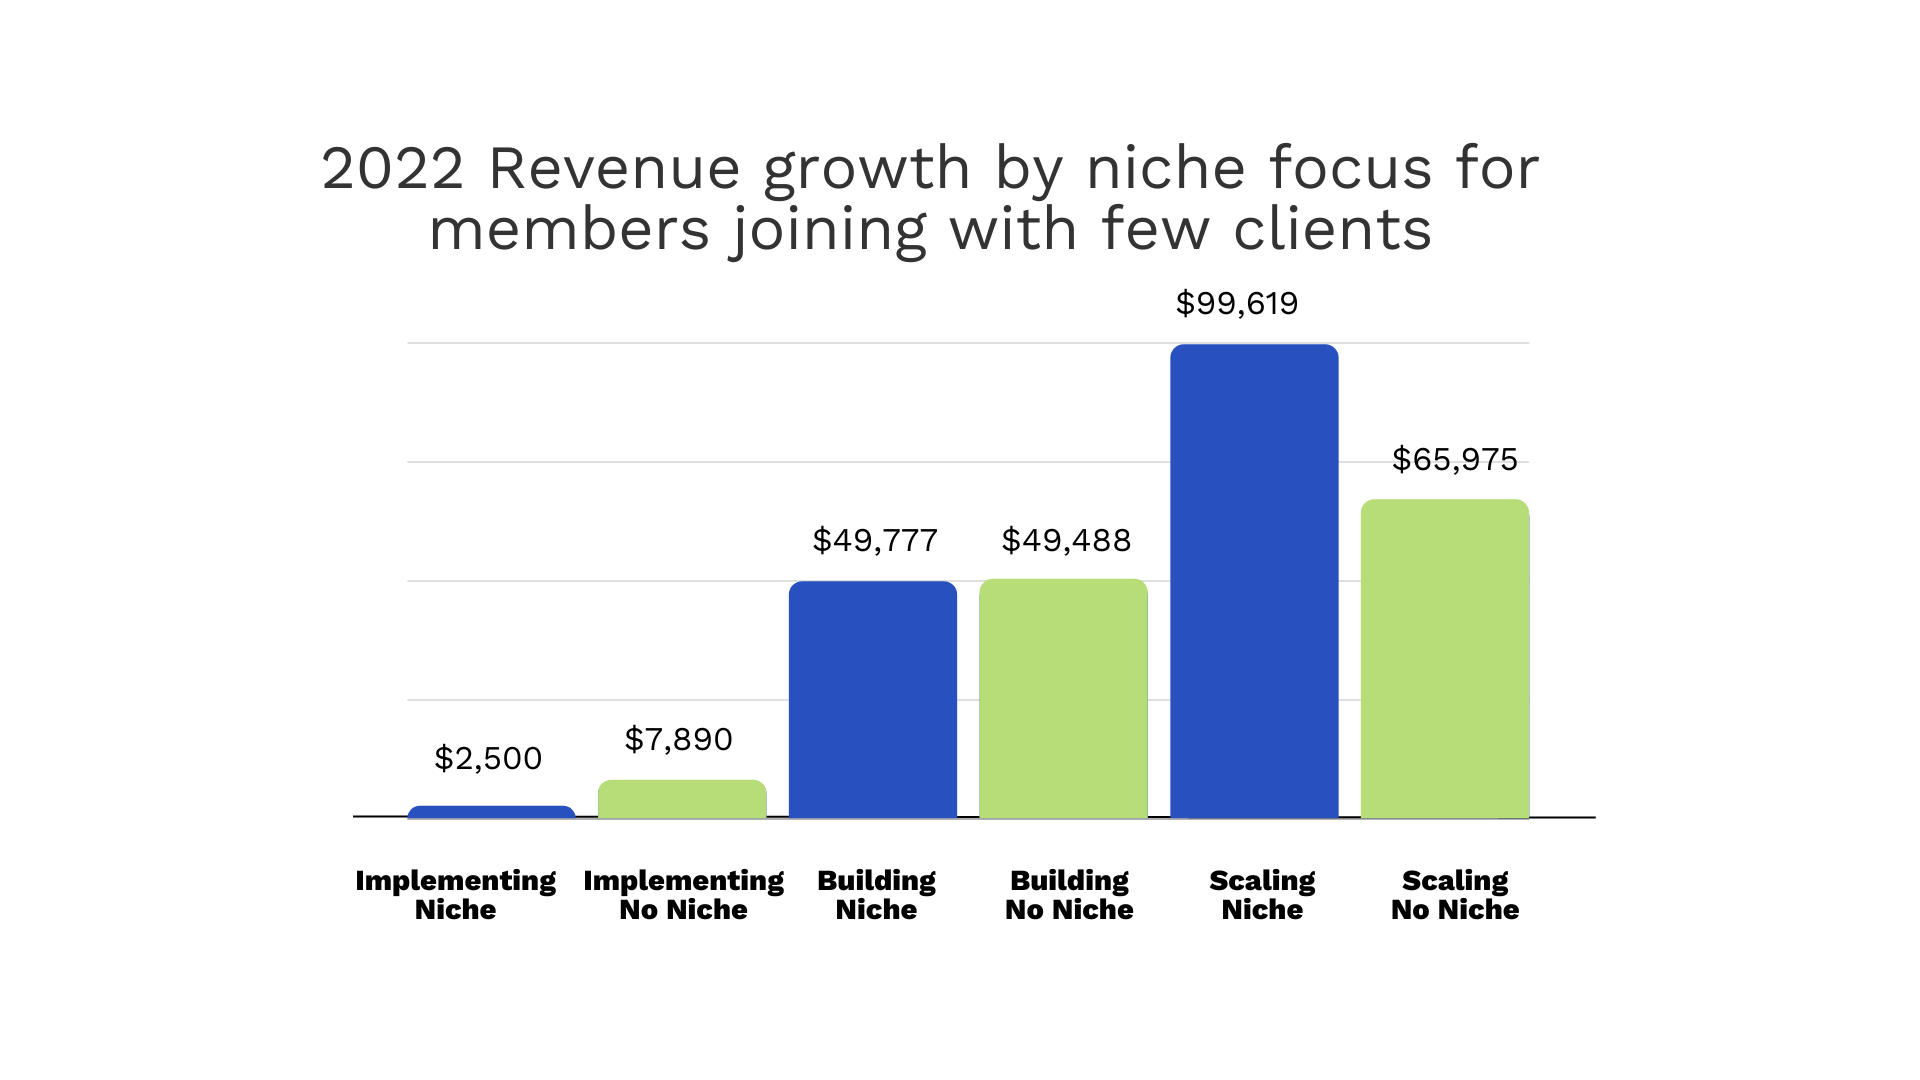 2022 Revenue Growth by Niche Focus for Members Joining with Few Clients